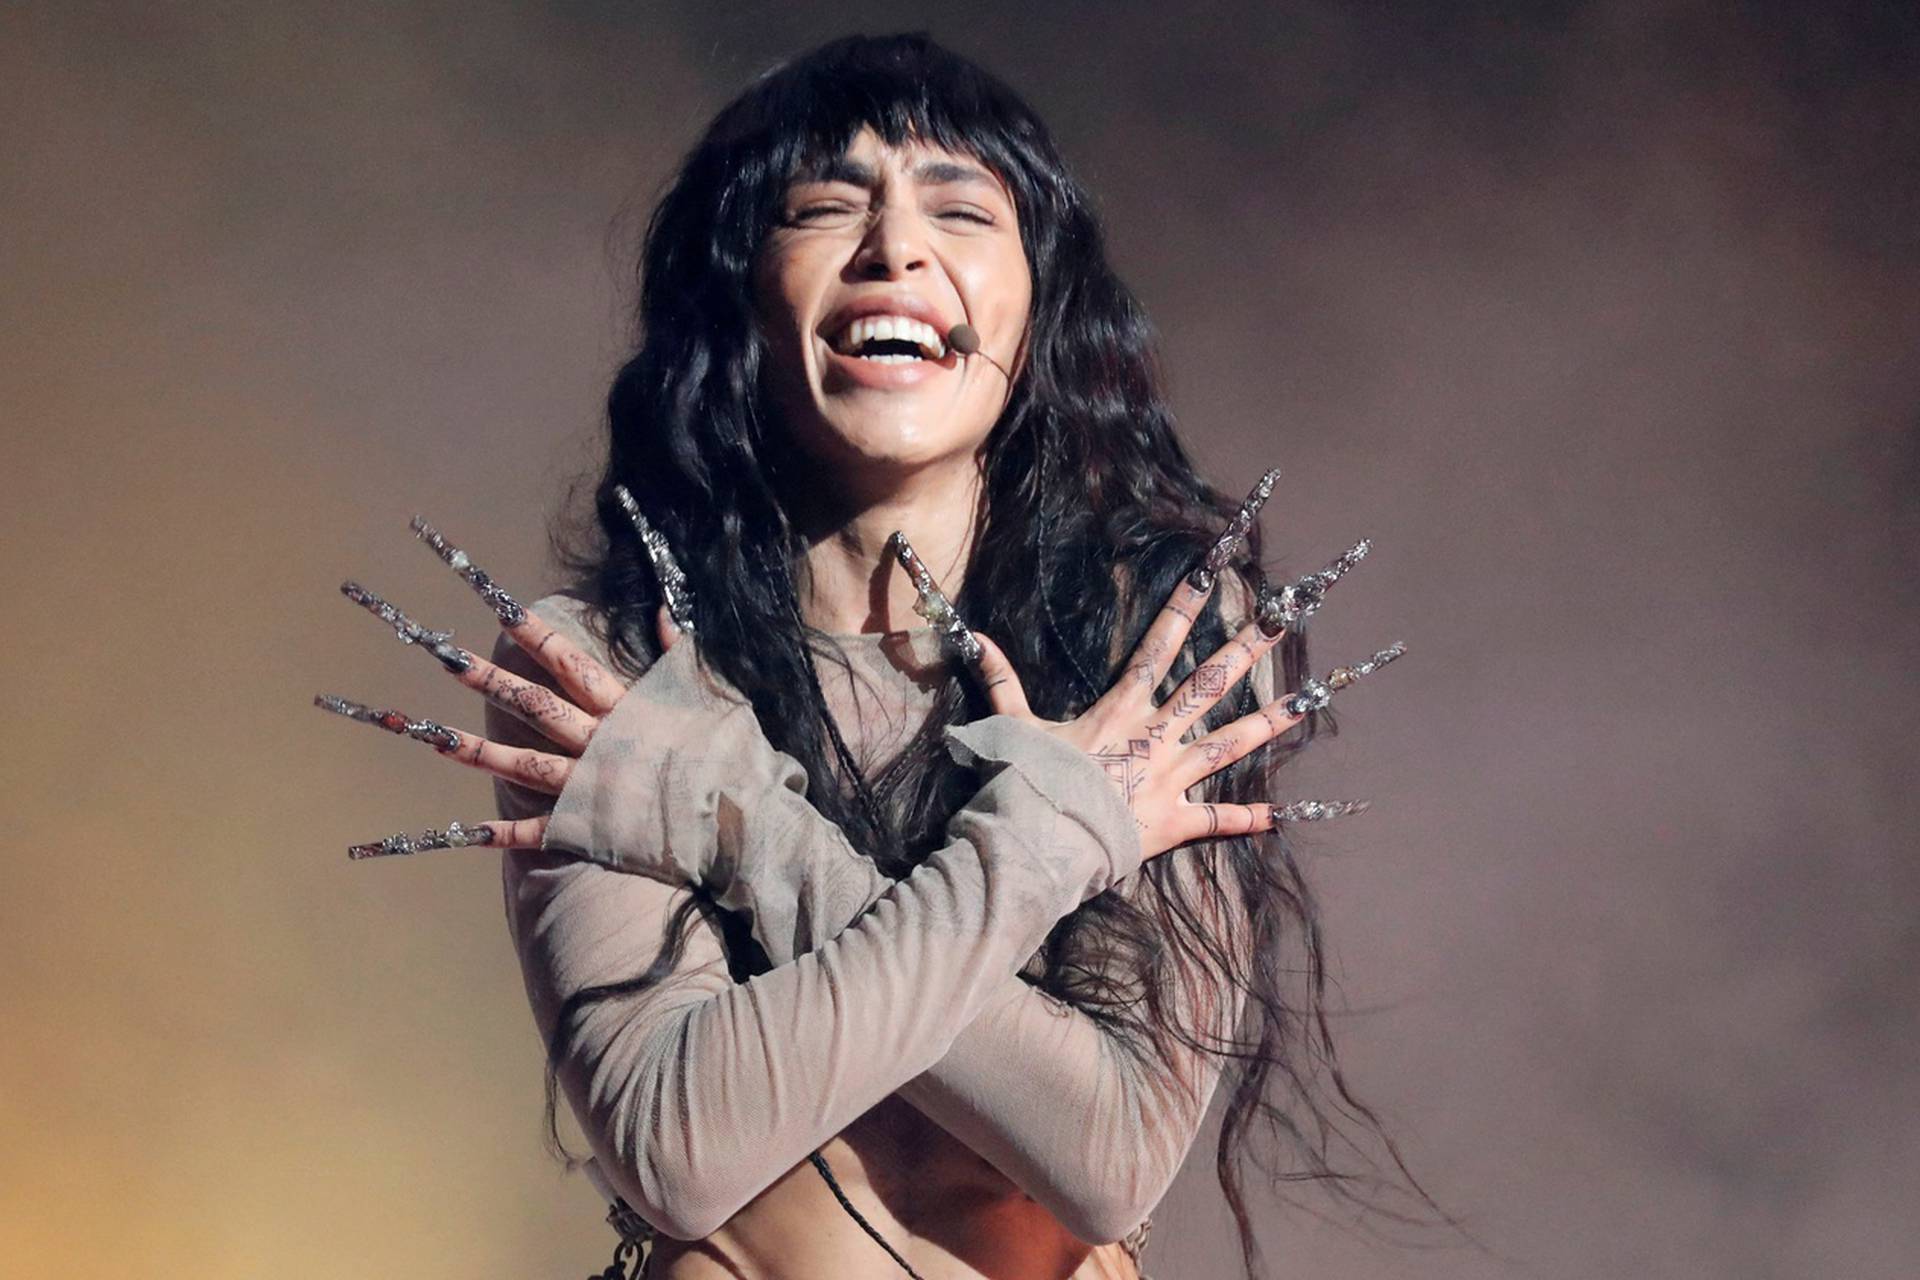 Loreen wins Melodifestivalen song contest in Stockholm